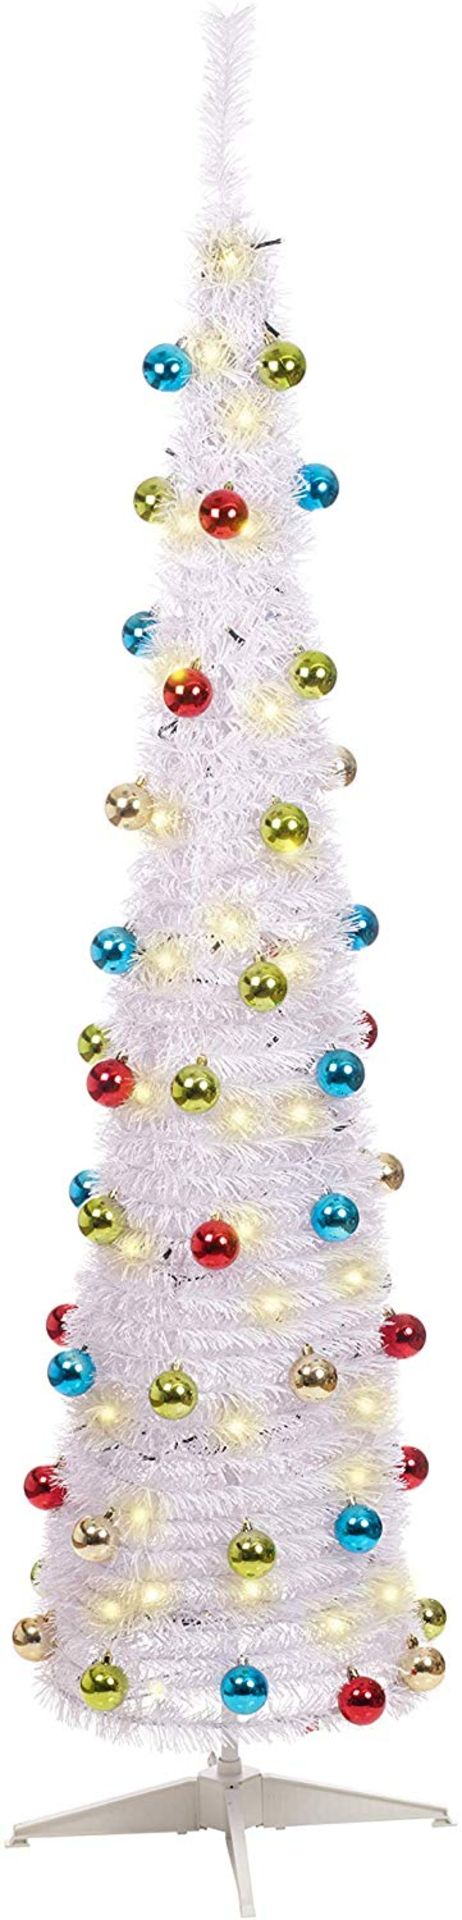 The Christmas Workshop 88220 6 Foot 6ft Decorated Slim Line Pop Up Christmas Tree-White - Image 2 of 2